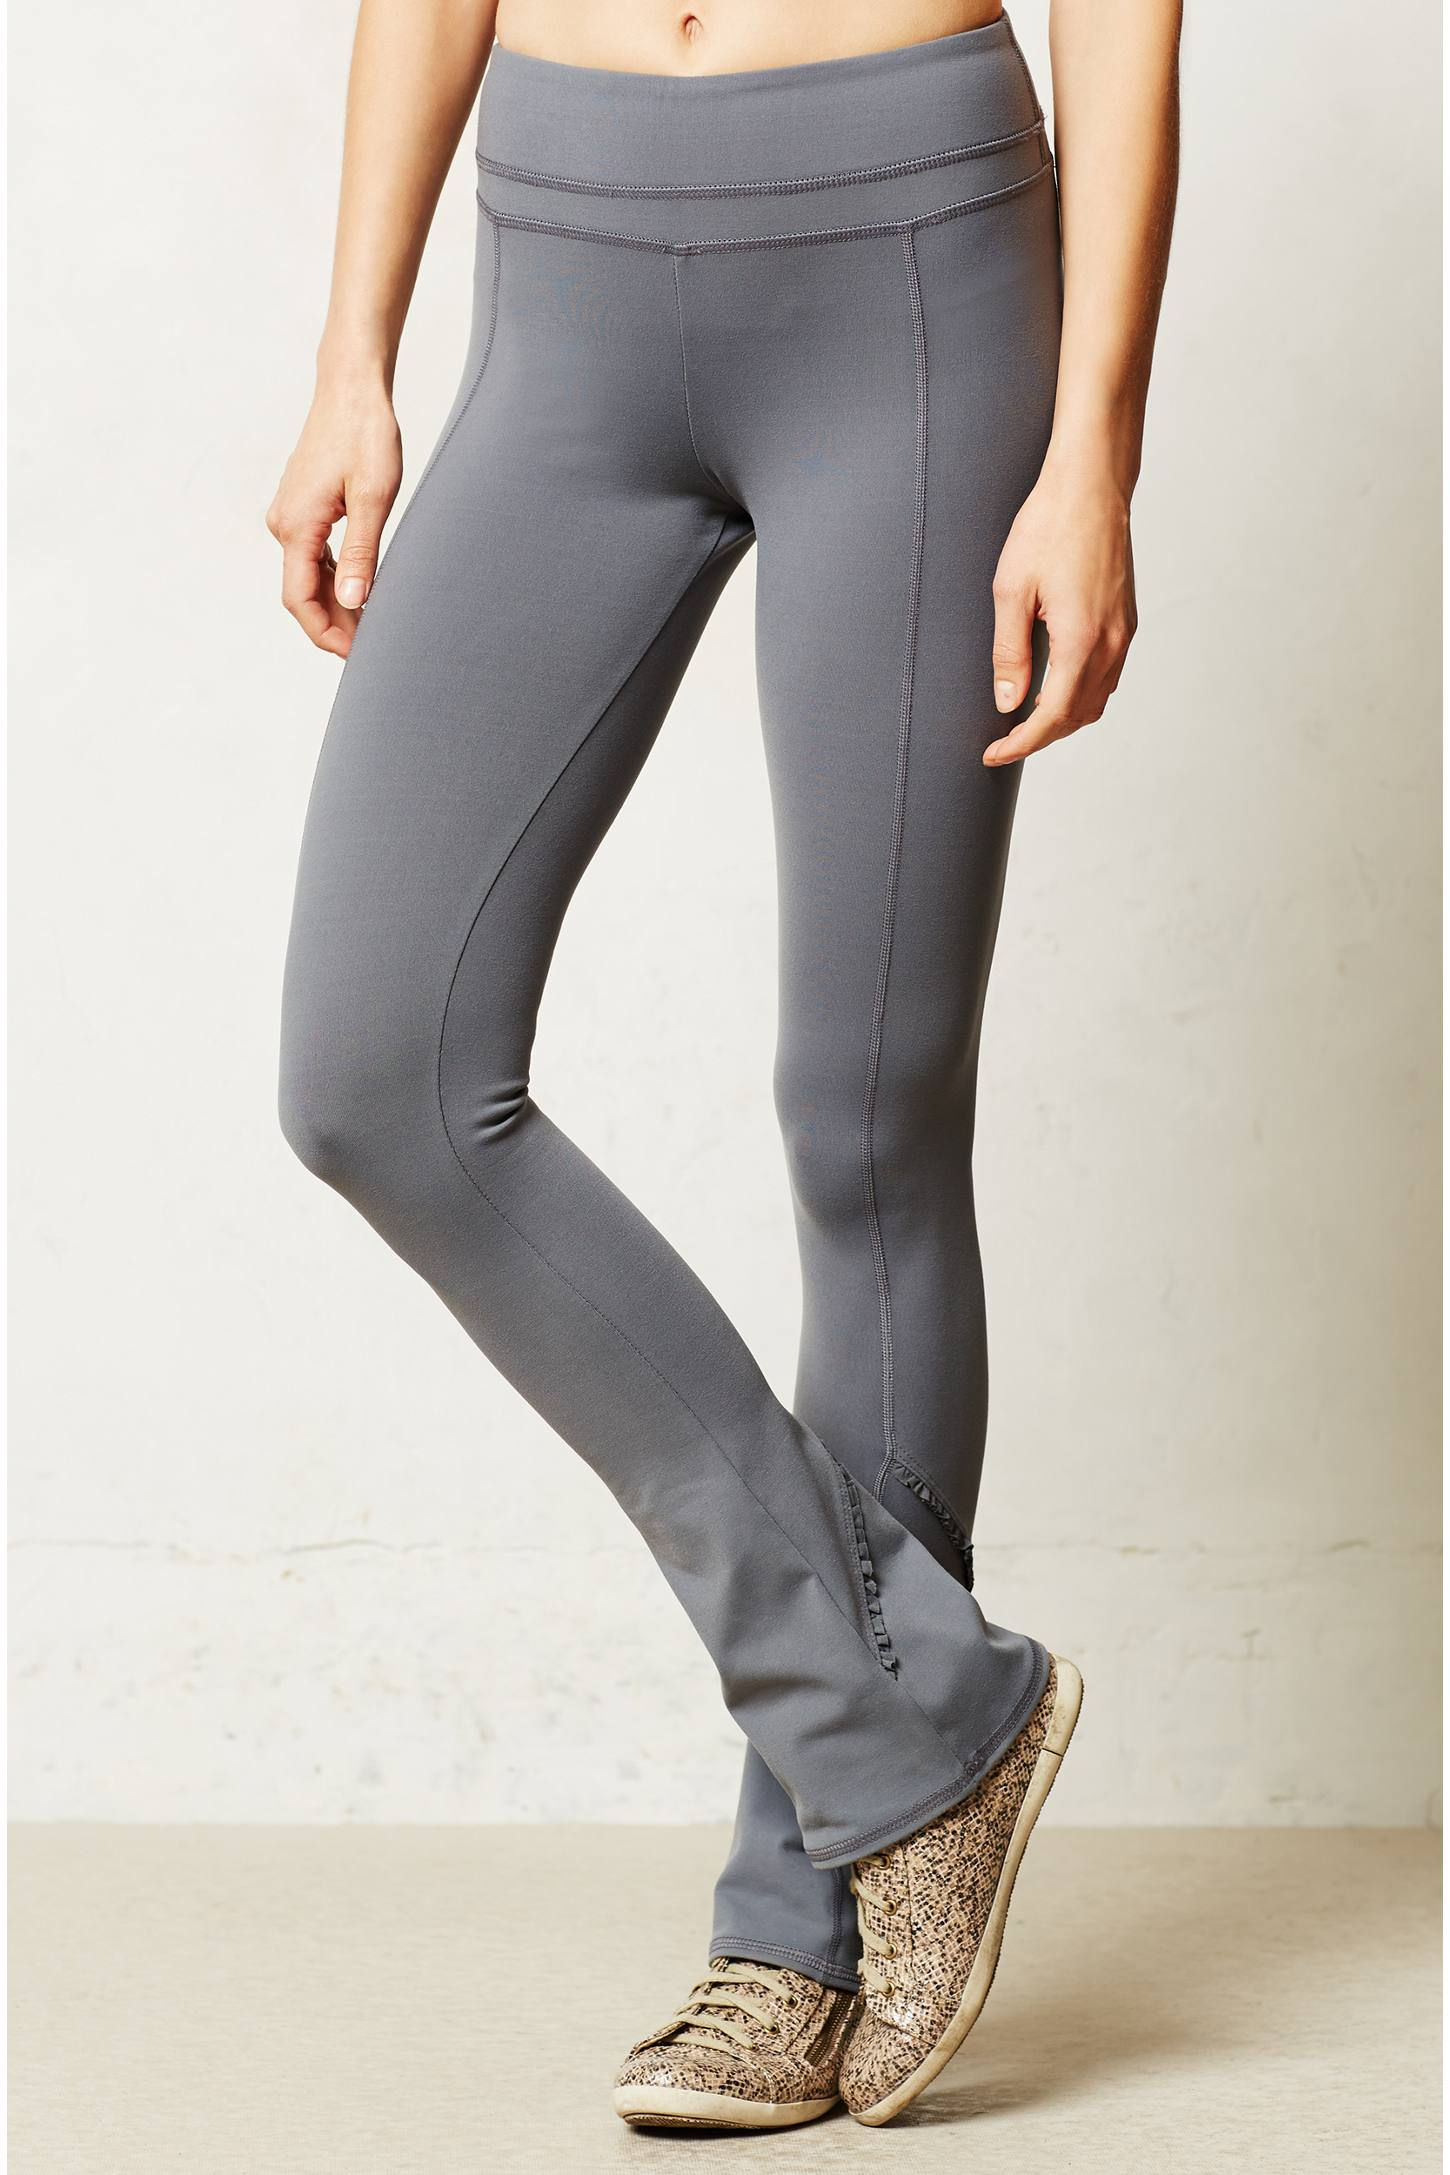  Athletic Tights – Advanced Lightweight Compression